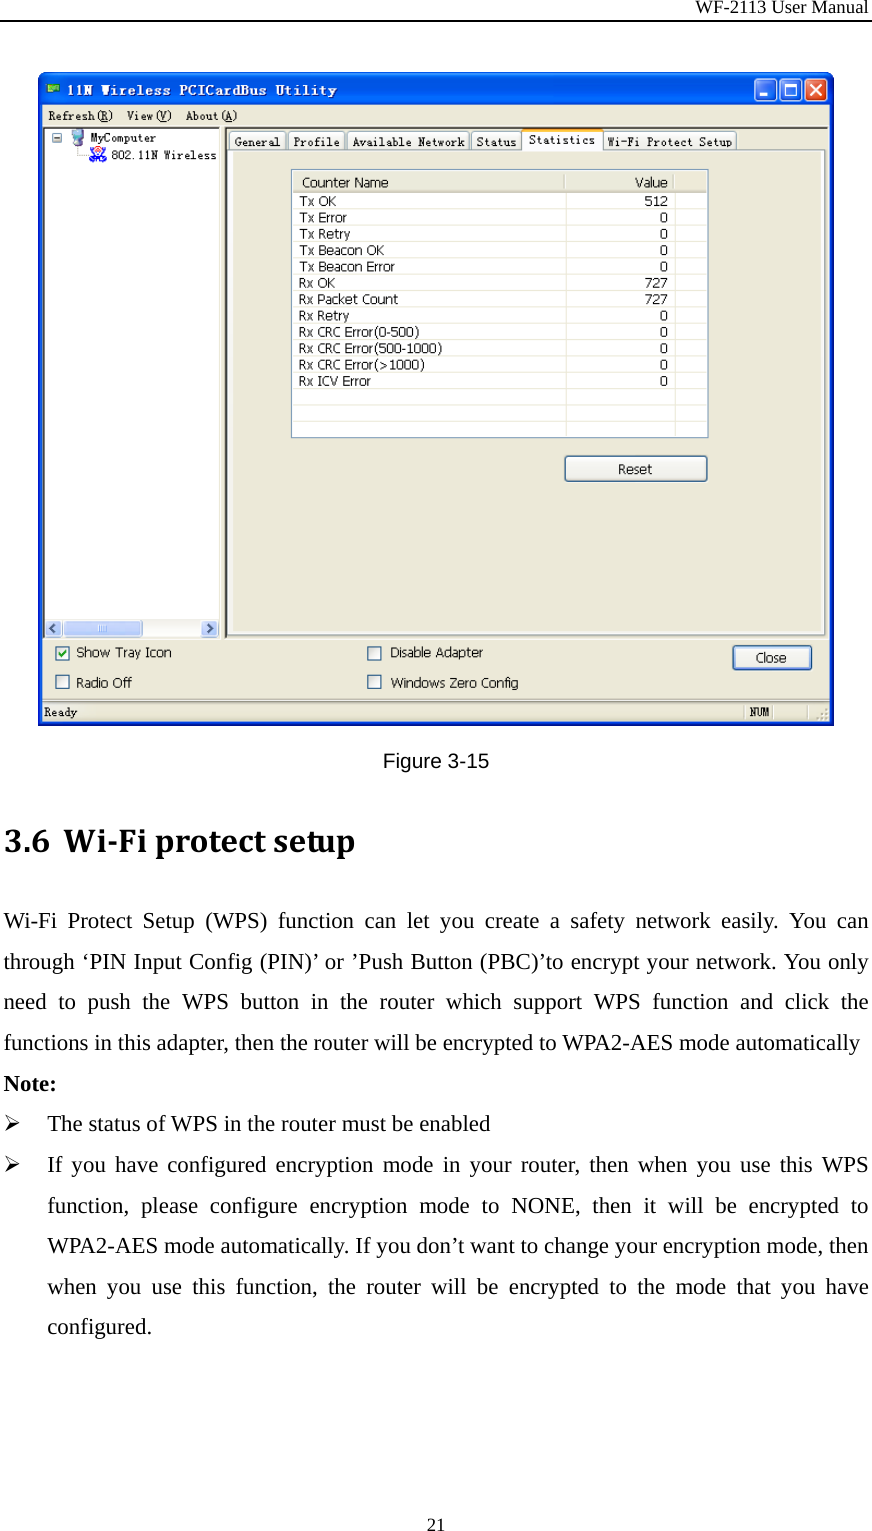 WF-2113 User Manual 21 Figure 3-15 3.6 WiFiprotectsetupWi-Fi Protect Setup (WPS) function can let you create a safety network easily. You can through ‘PIN Input Config (PIN)’ or ’Push Button (PBC)’to encrypt your network. You only need to push the WPS button in the router which support WPS function and click the functions in this adapter, then the router will be encrypted to WPA2-AES mode automatically Note: ¾ The status of WPS in the router must be enabled ¾ If you have configured encryption mode in your router, then when you use this WPS function, please configure encryption mode to NONE, then it will be encrypted to WPA2-AES mode automatically. If you don’t want to change your encryption mode, then when you use this function, the router will be encrypted to the mode that you have configured. 